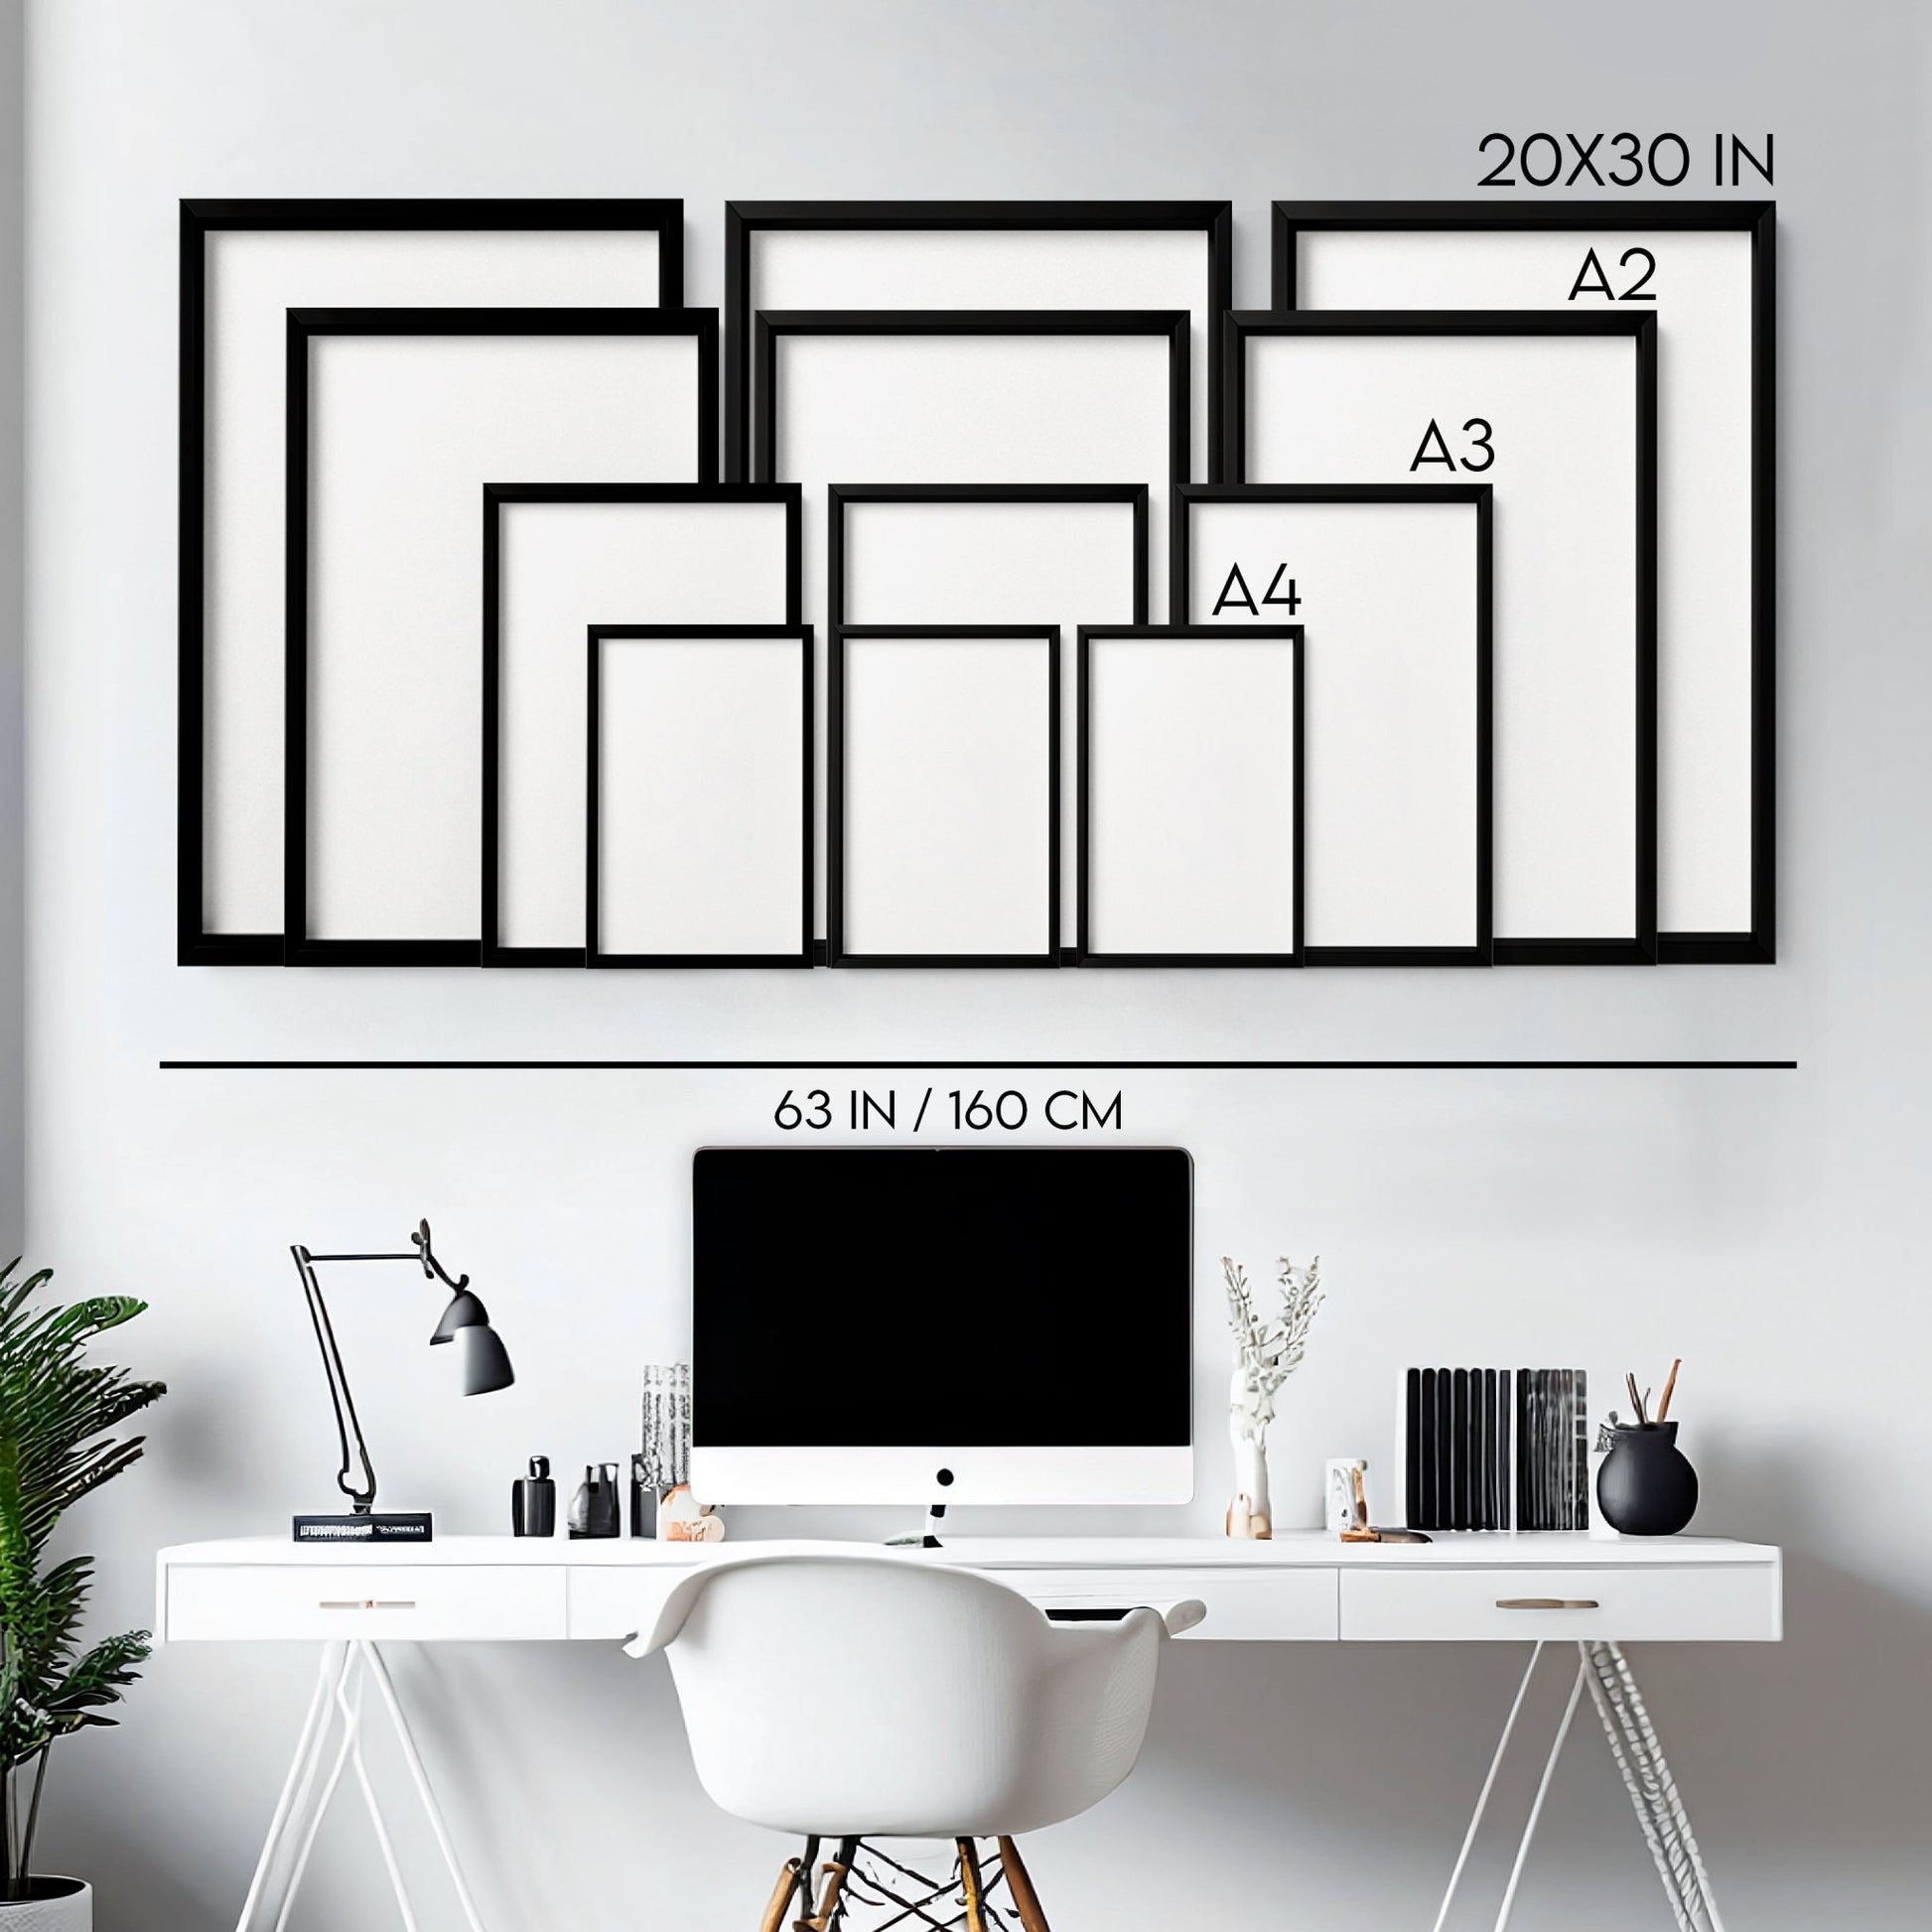 Cool office decor | set of 3 wall art prints - About Wall Art